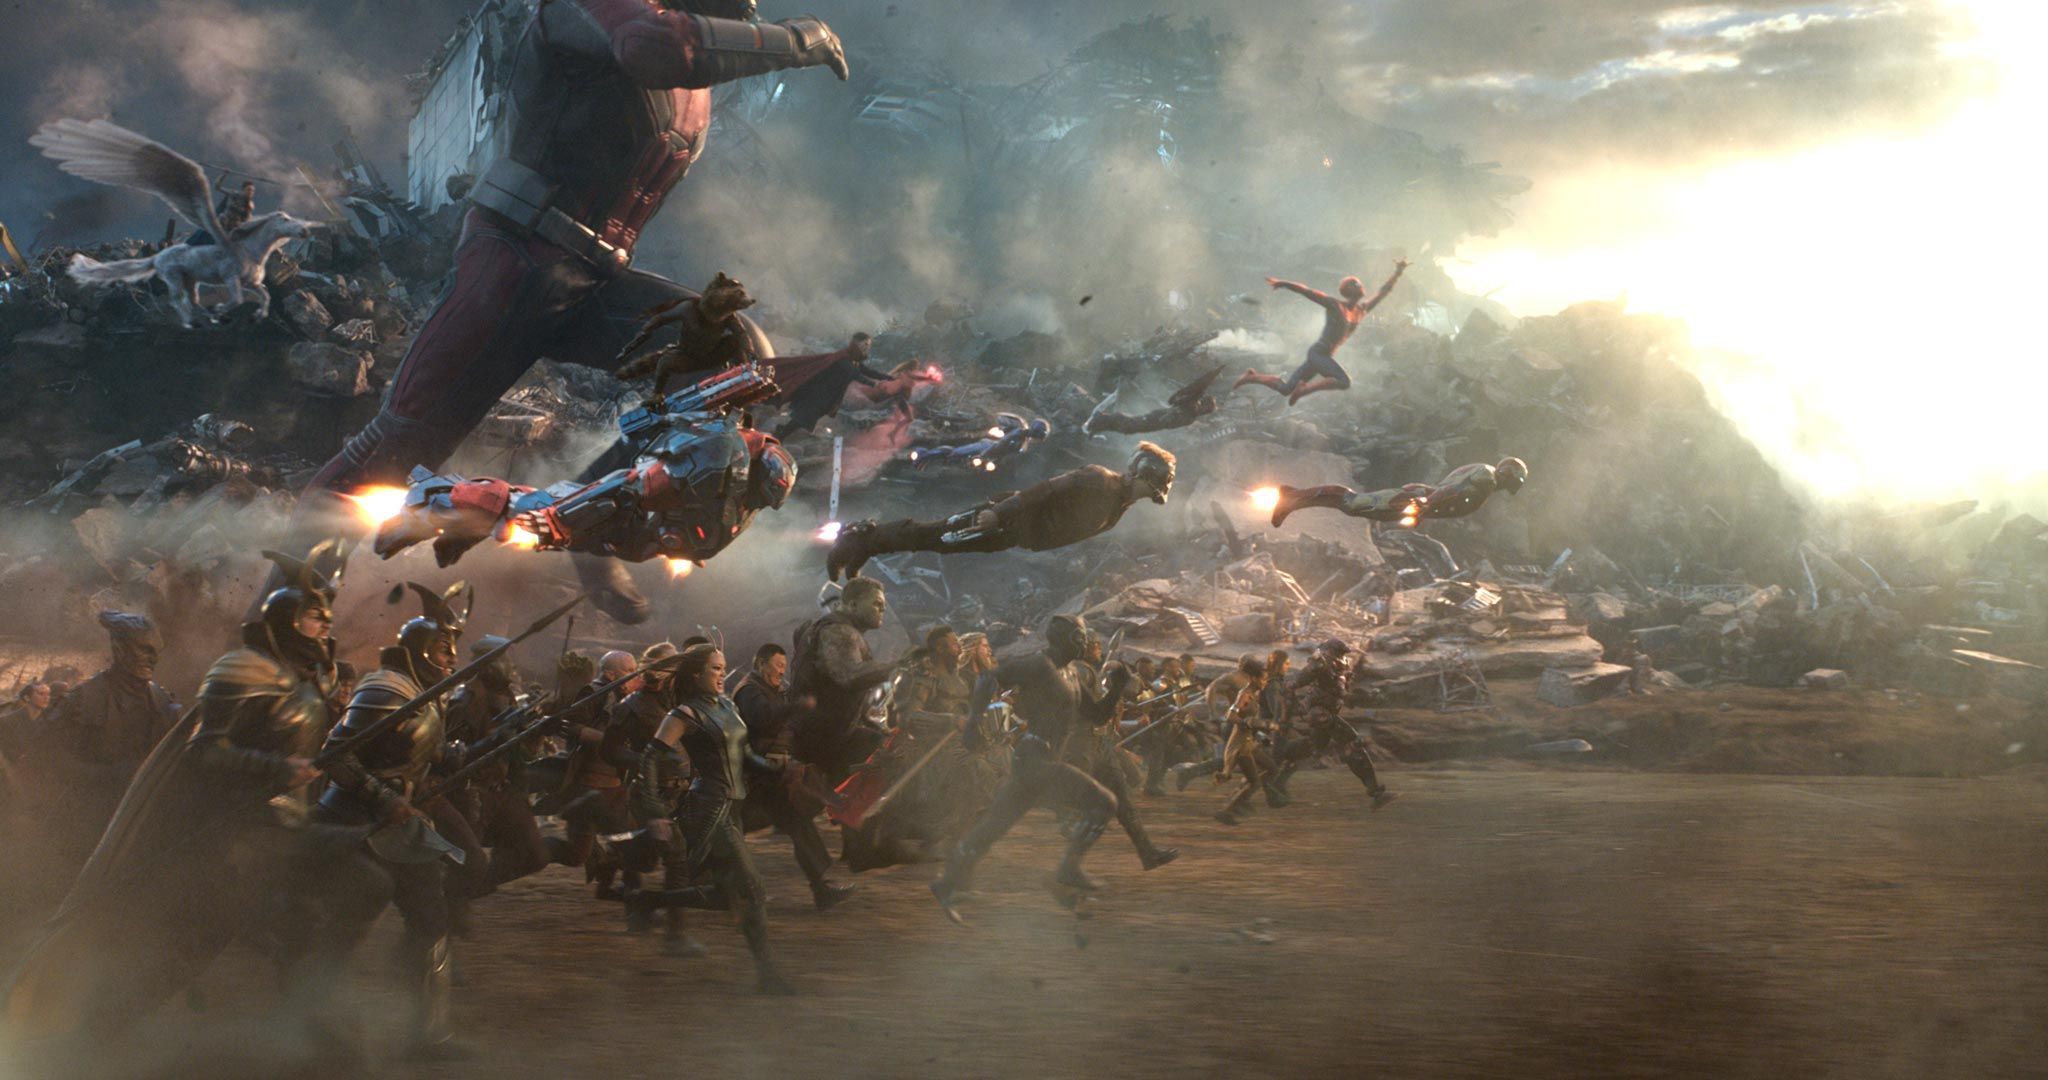 Avengers: Endgame's final battle came from VFX artists playing